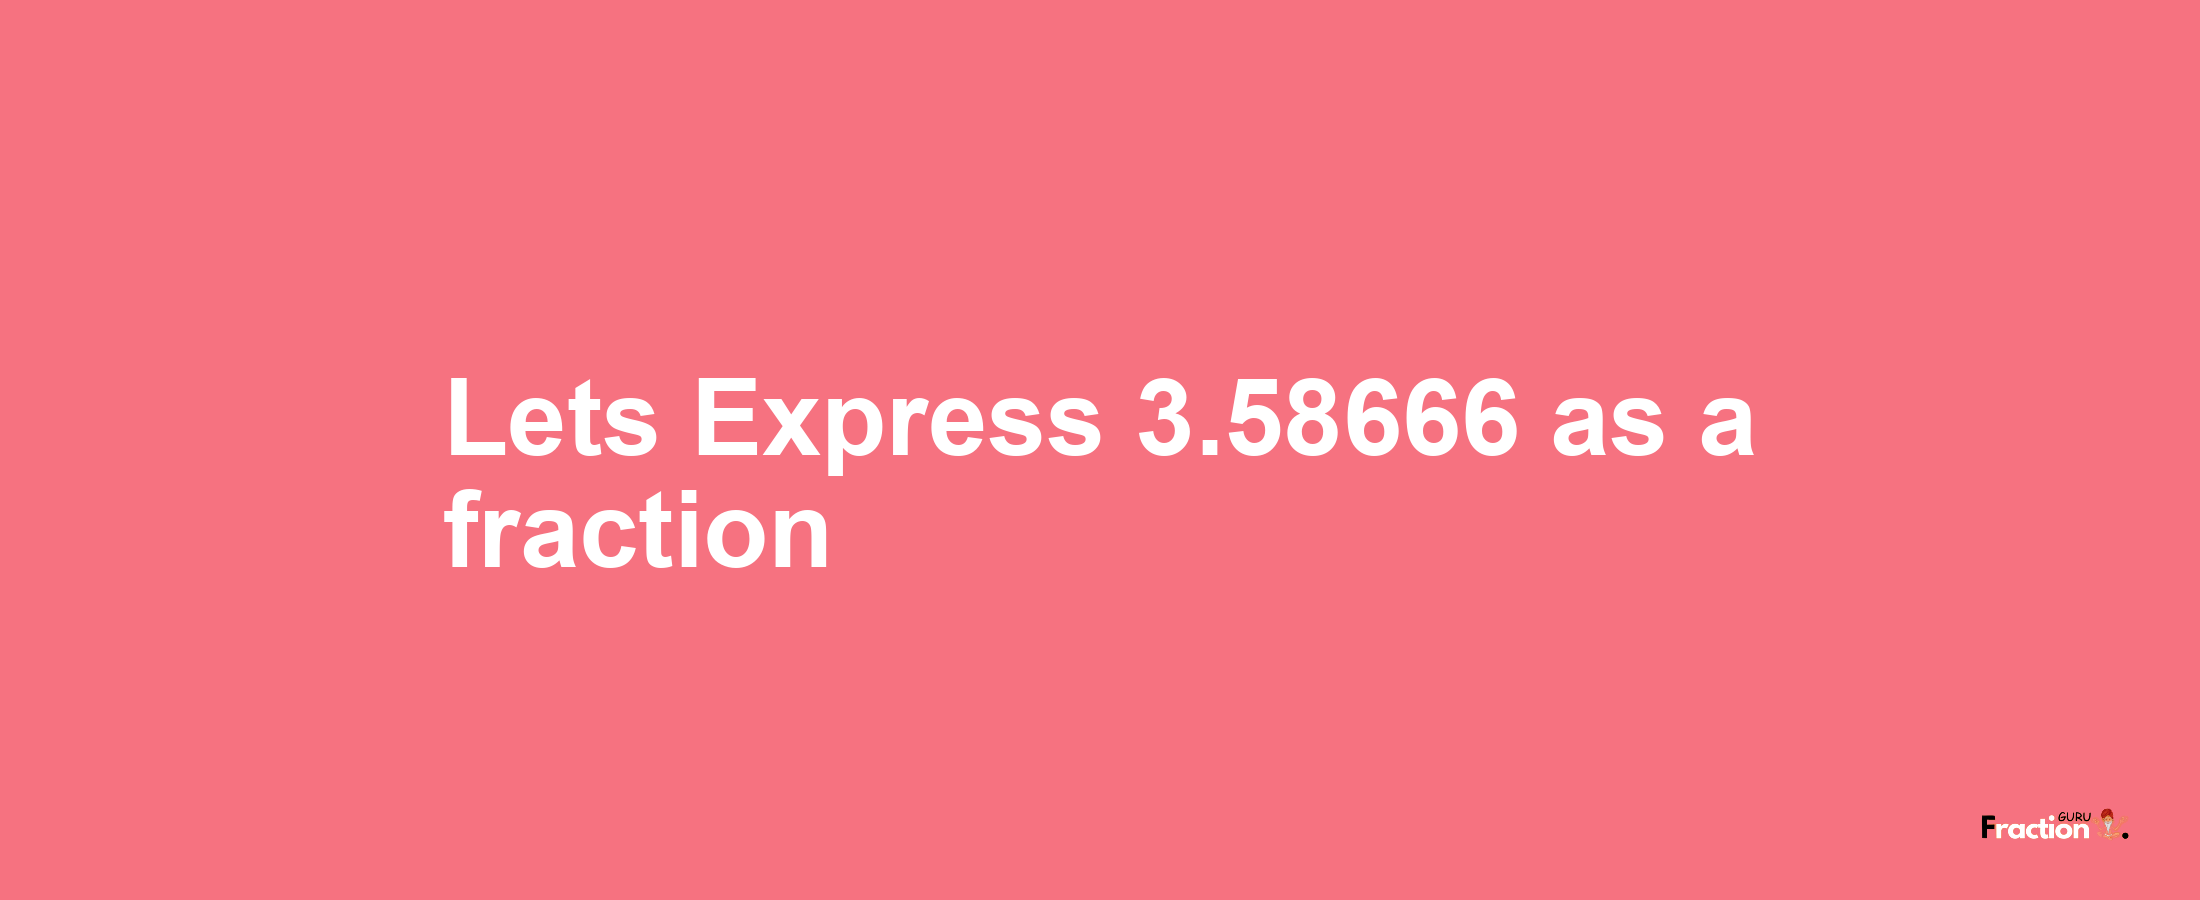 Lets Express 3.58666 as afraction